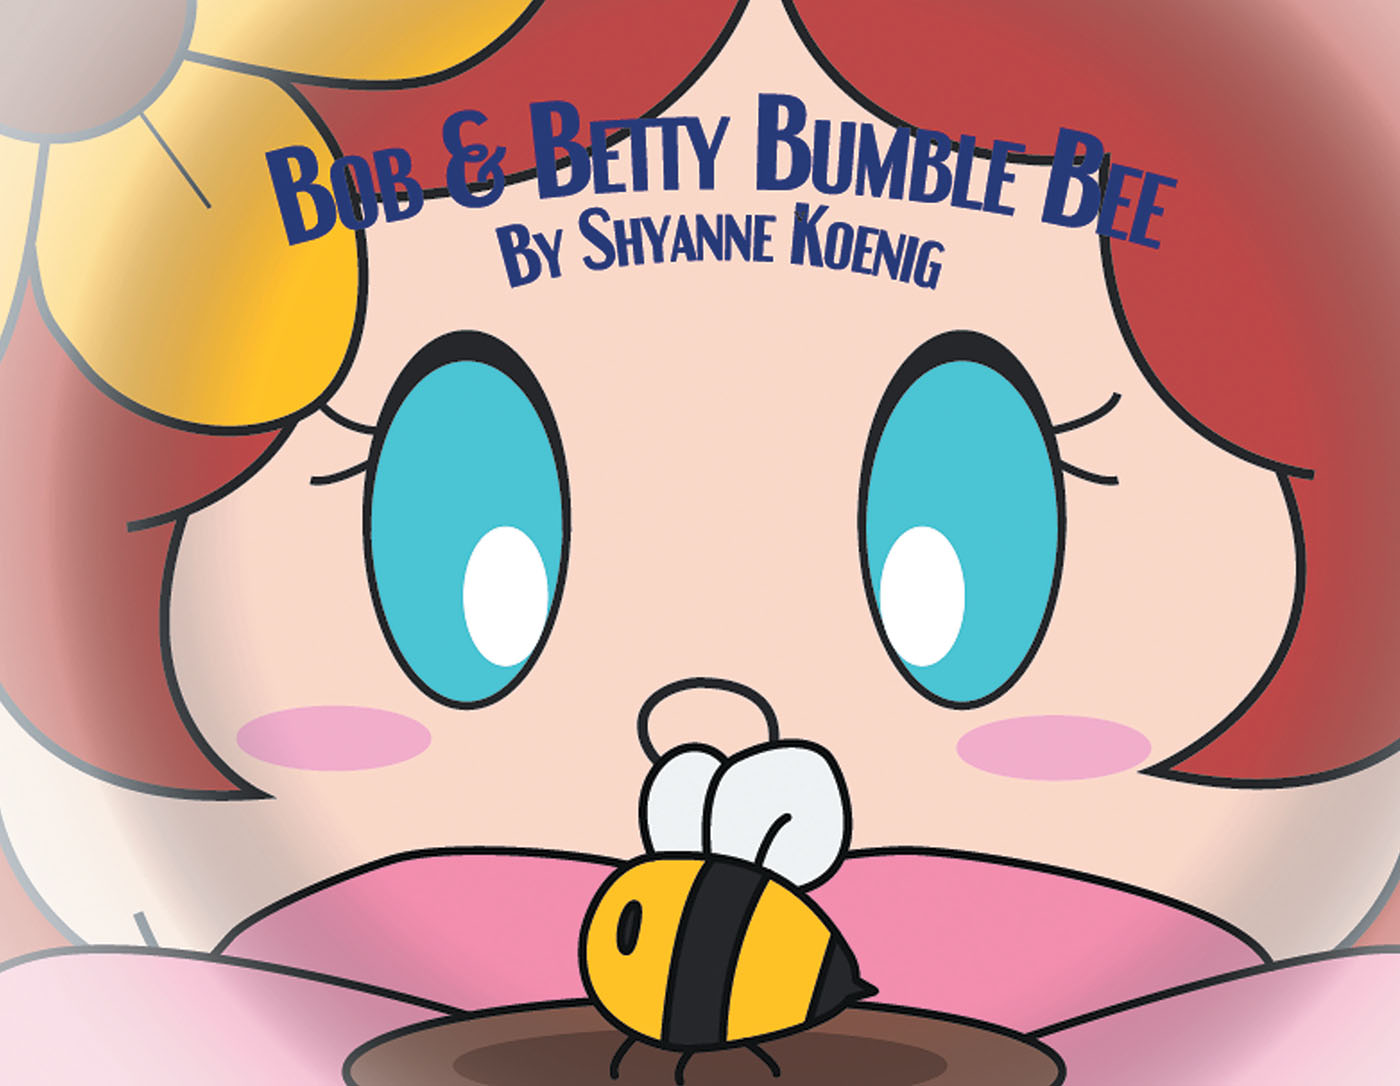 Bob and Betty Bumble Bee Cover Image